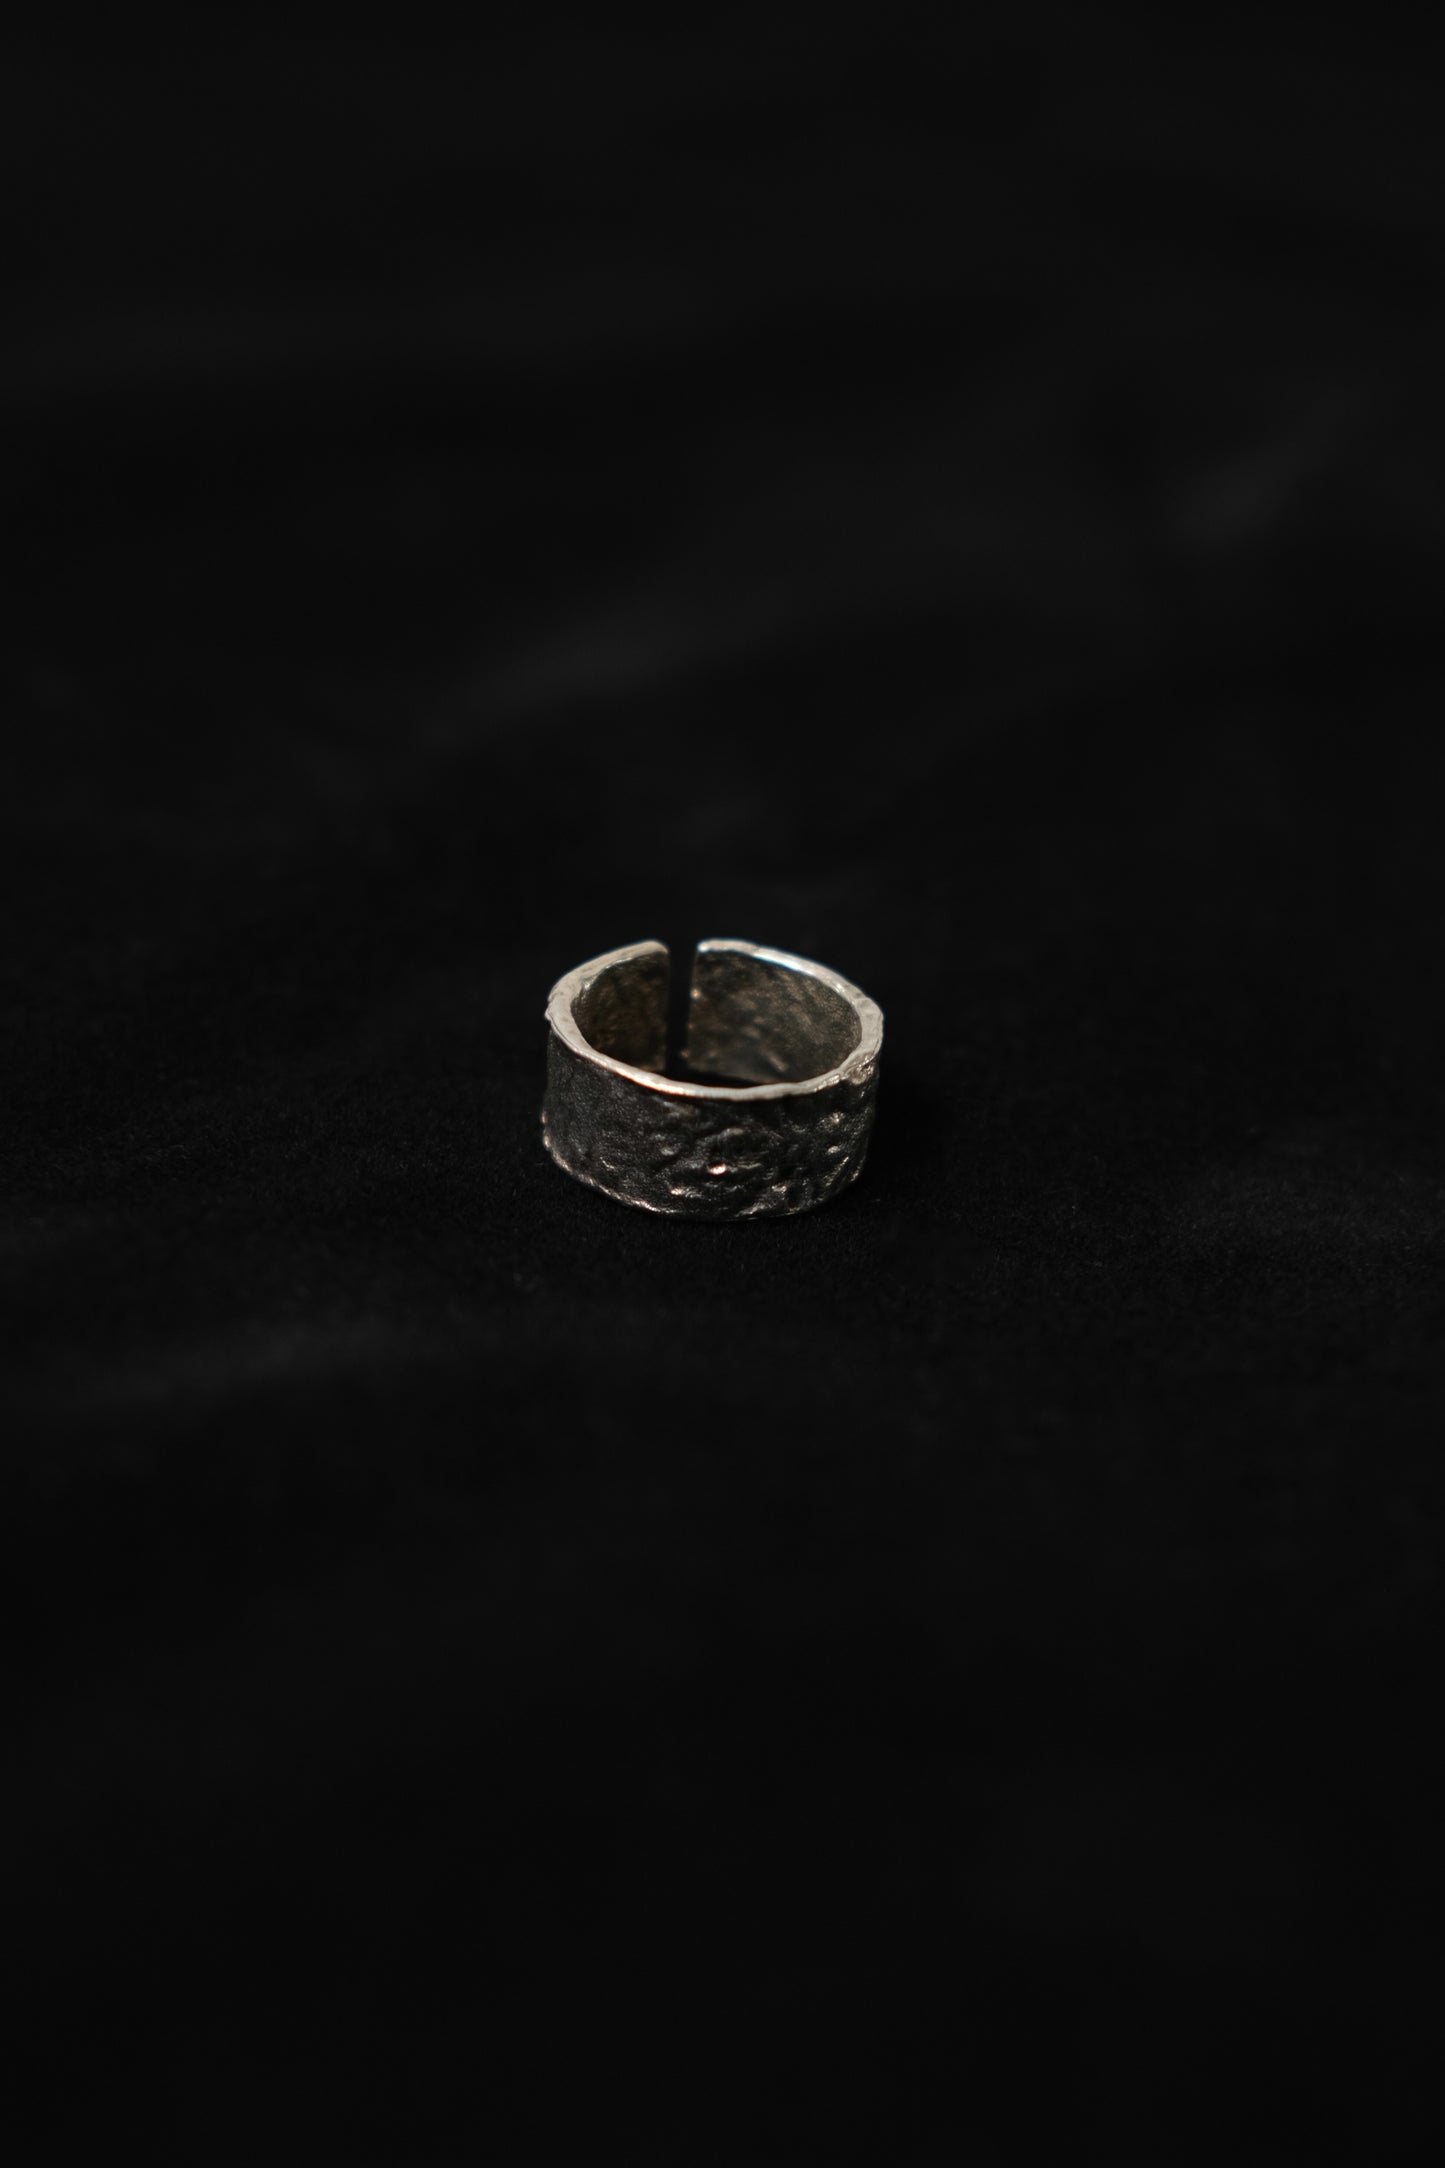 Tinfoil wrinkled metal texture ring in Sterling Silver